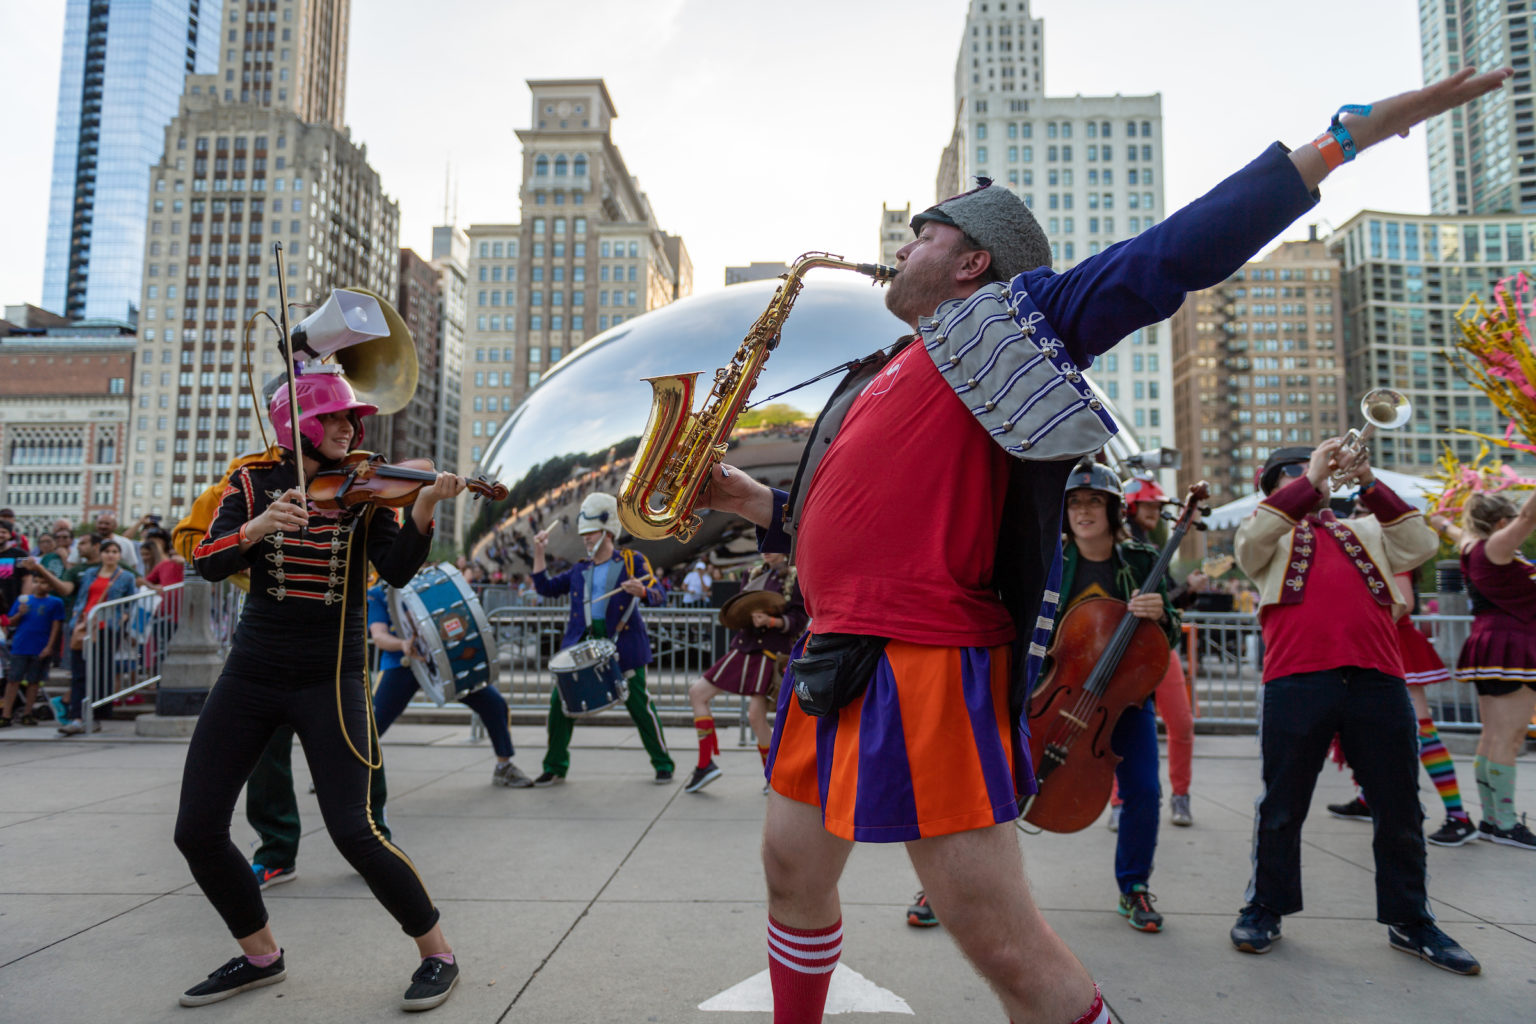 Get Your Groove On at Chicago's SummerDance Celebration Concierge